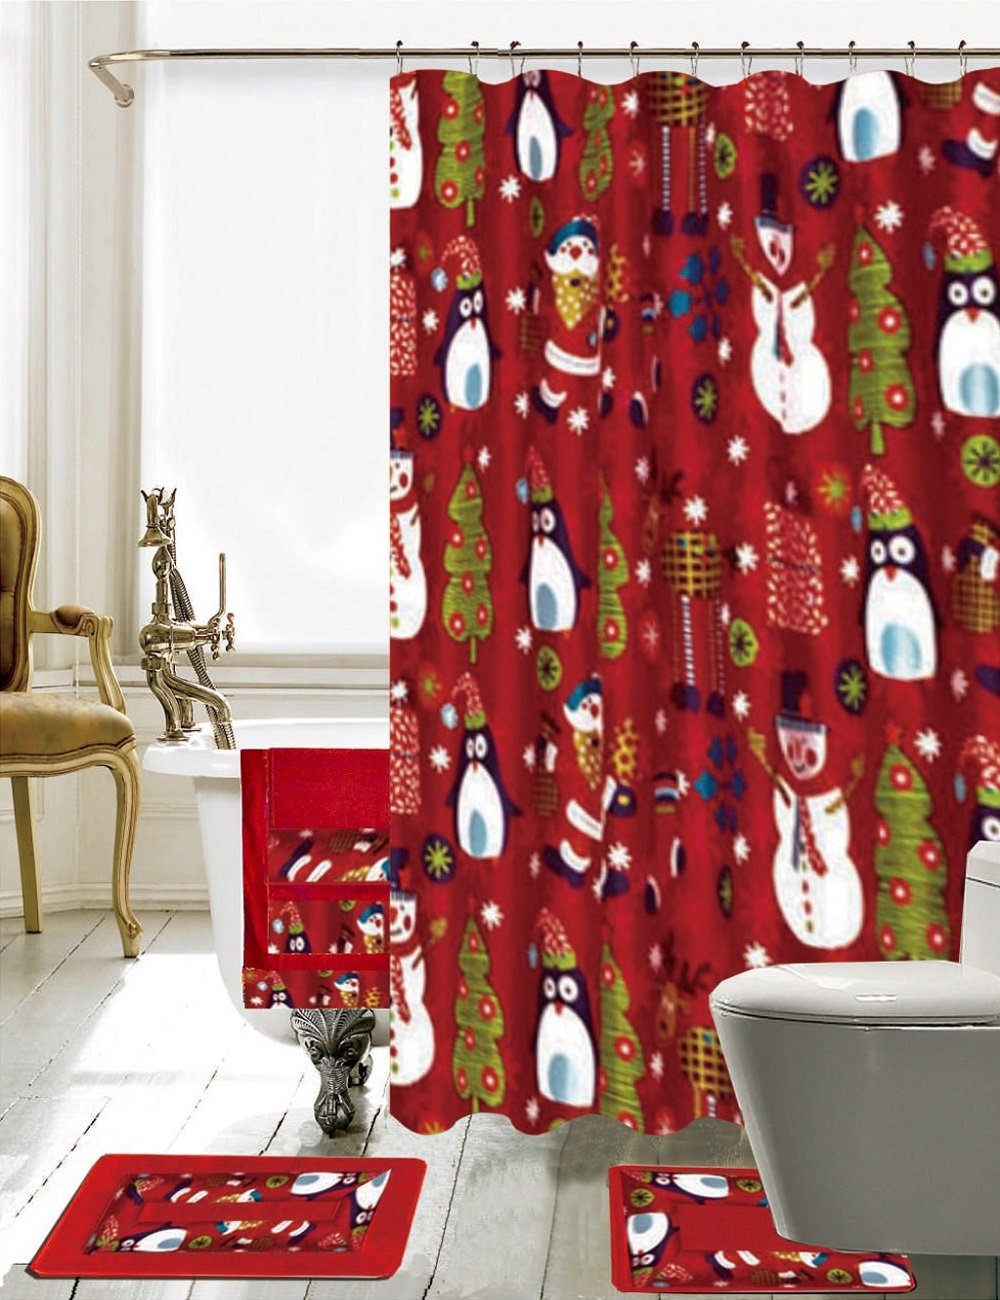 Season's Greetings 18 Piece Embroidery Bath Set 1 Bath Mat , 1 Contour Mat , 1 Shower Curtain , 12 Matching Roller Shower Hooks , 3 Piece Matching Towel Seat Small to Large (18 Piece,Merry Christmas)